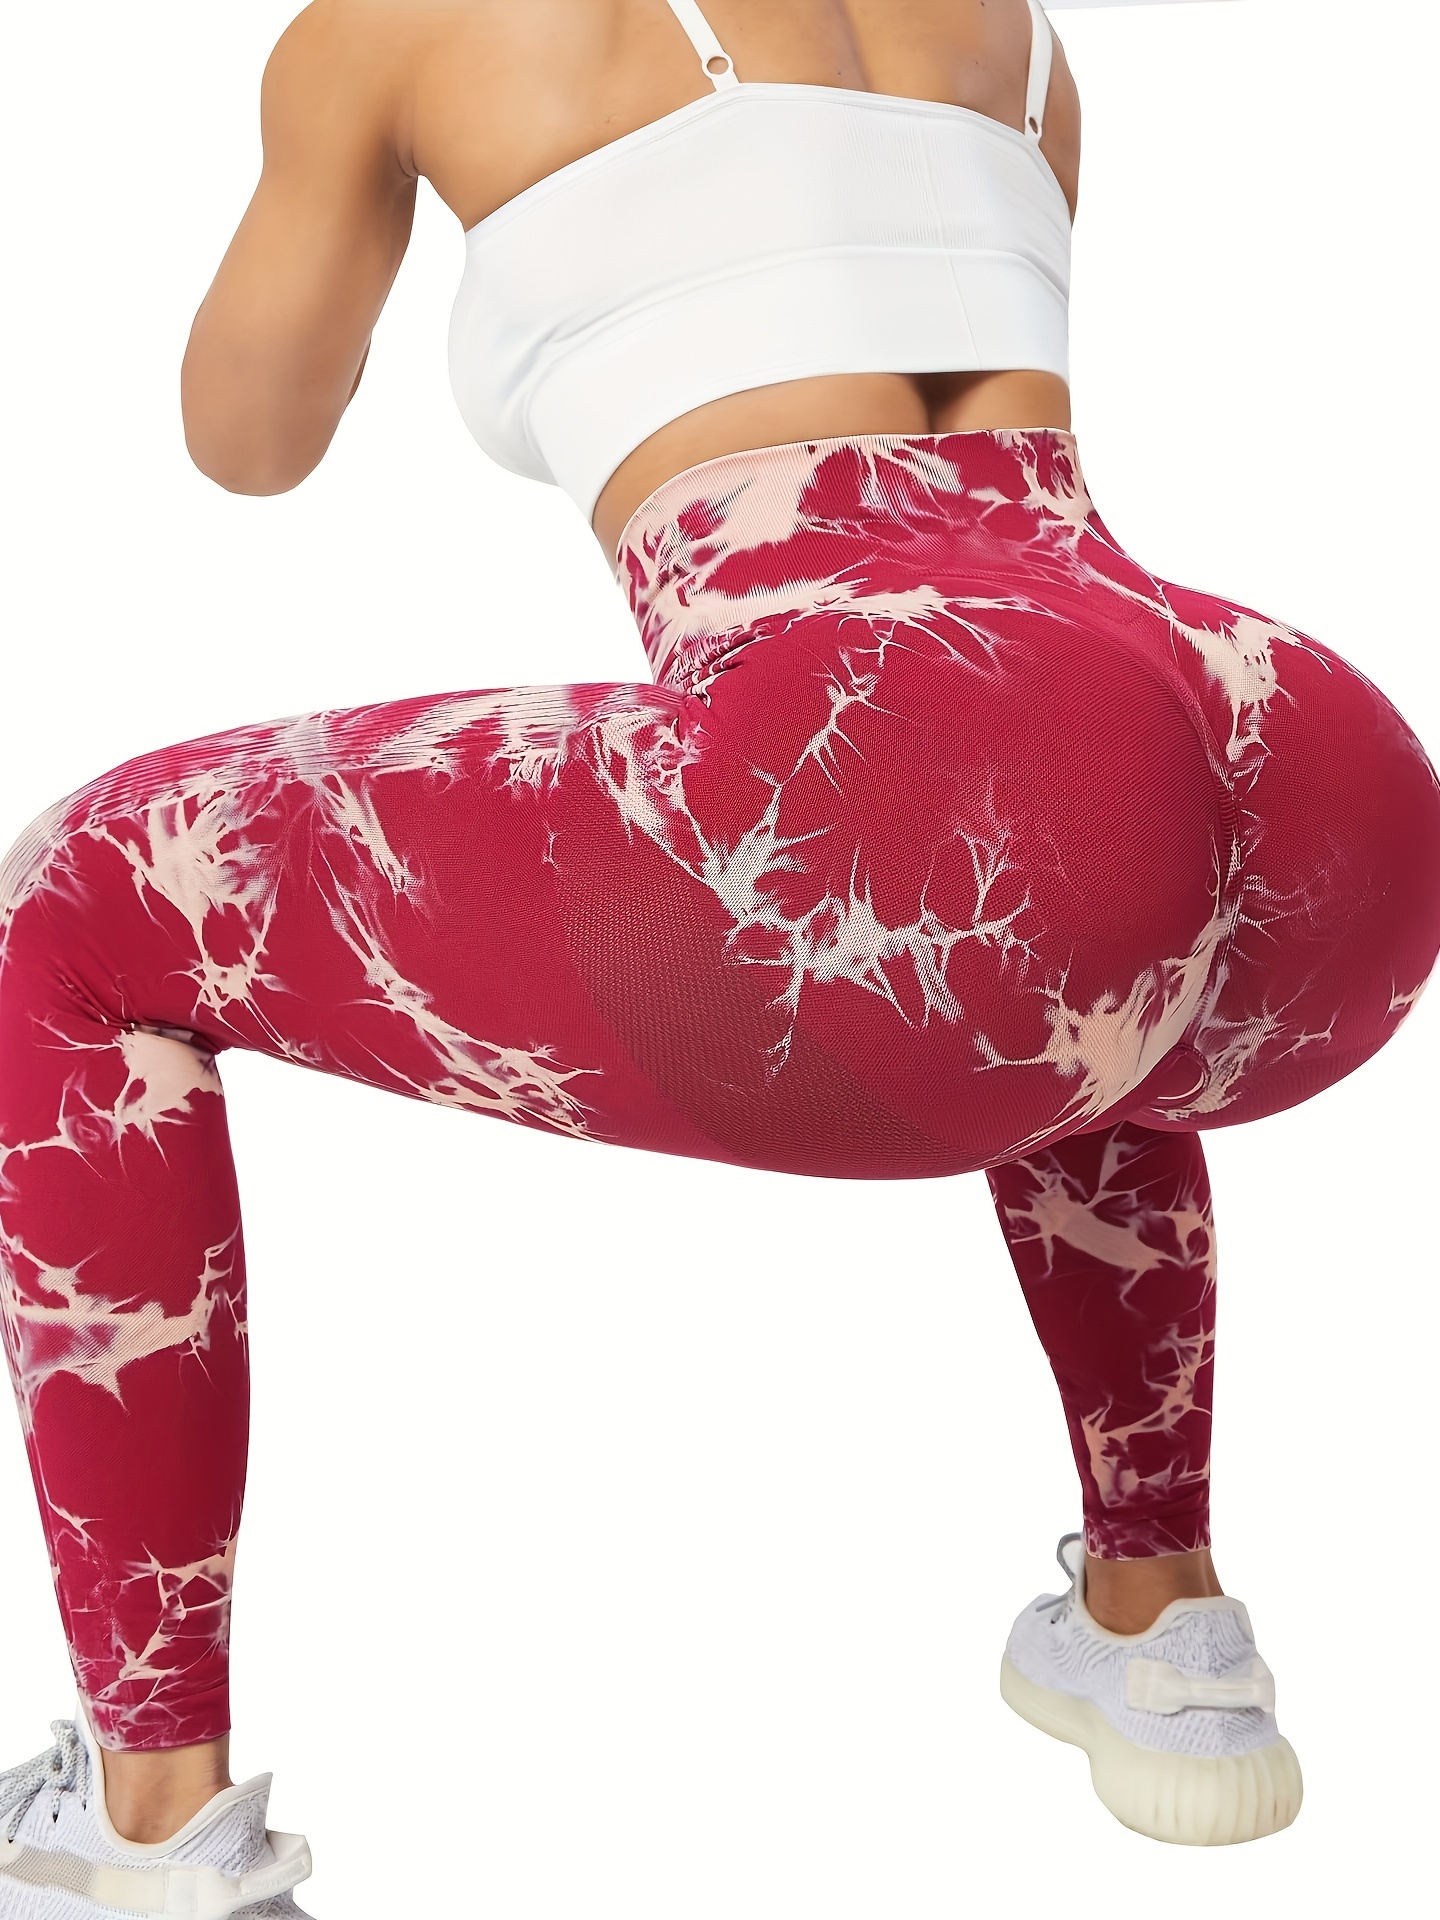 YWDJ Compression Leggings for Women Bubble Hip Lifting Exercise